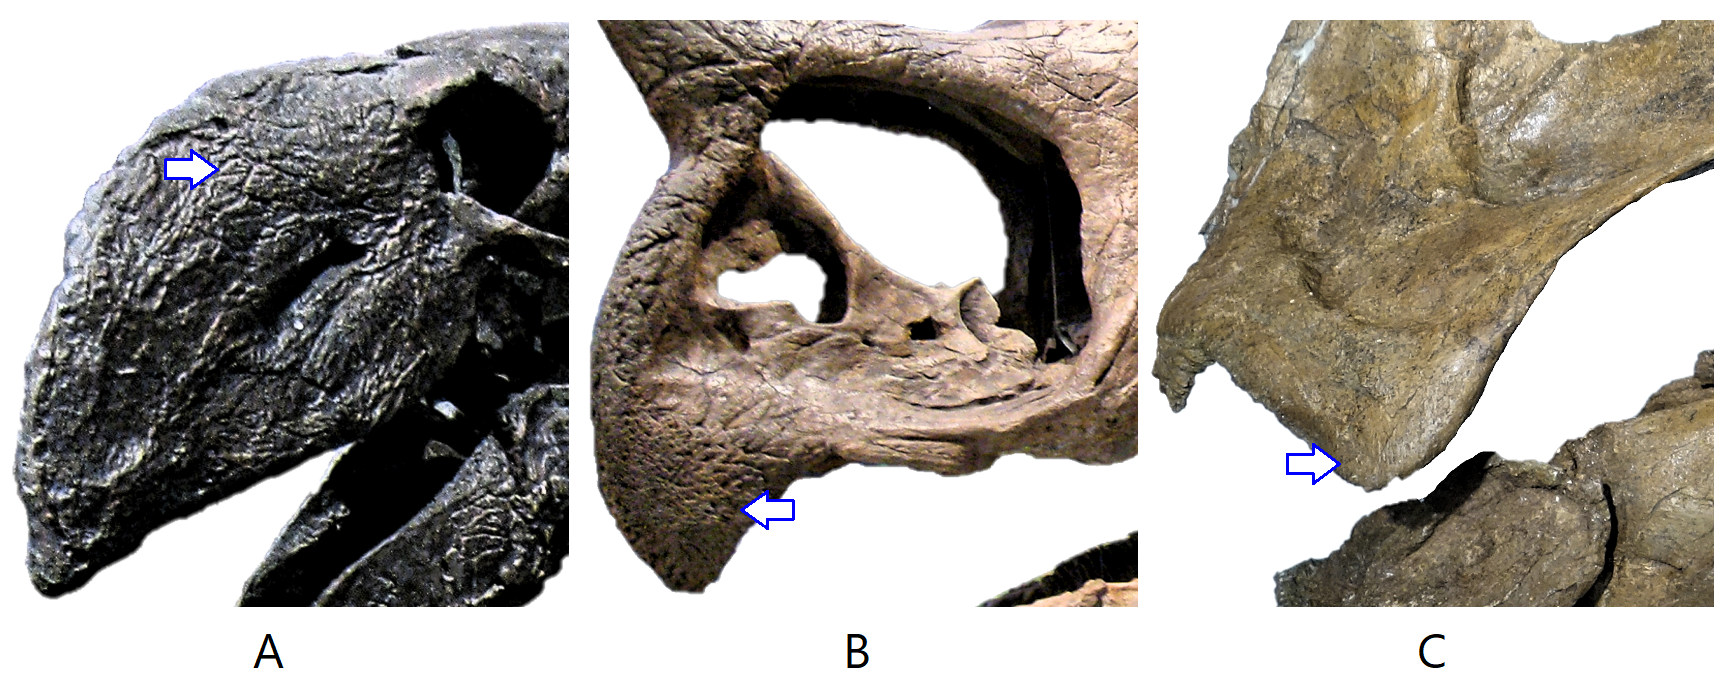 Figure 12. Lateral view (left side) on snout structure of (A) flightless bird Gastornis giganteus [3]; (B)  Triceratops prorsus [4]; and (C) Brachylophosaurus canadensis [2]. 